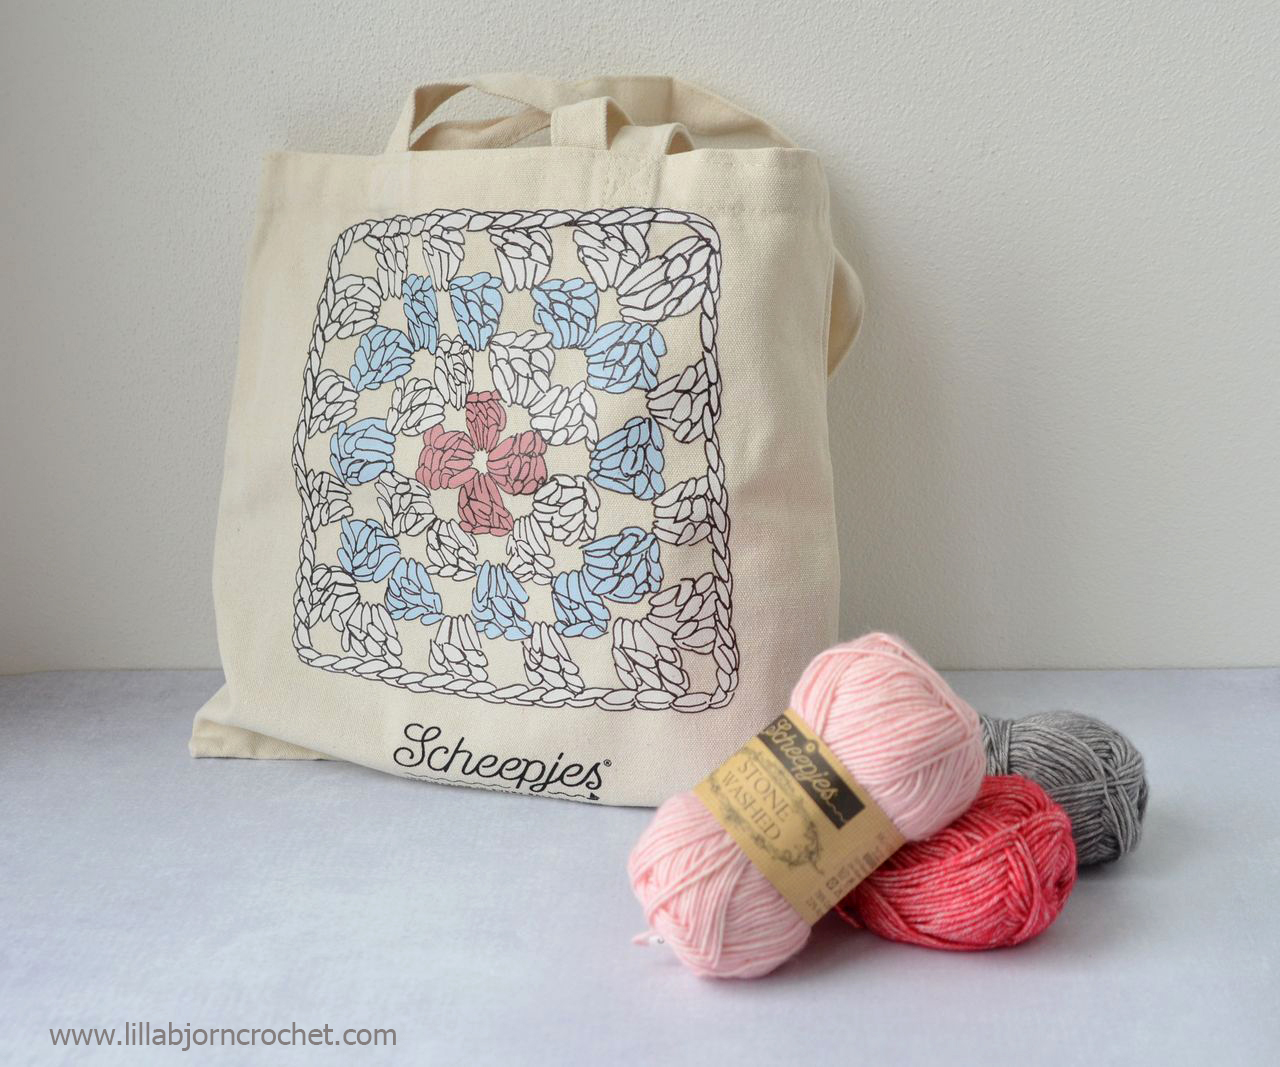 Canvas Tote by Scheepjes with granny square print. Gift guide by www.lillabjorncrochet.com